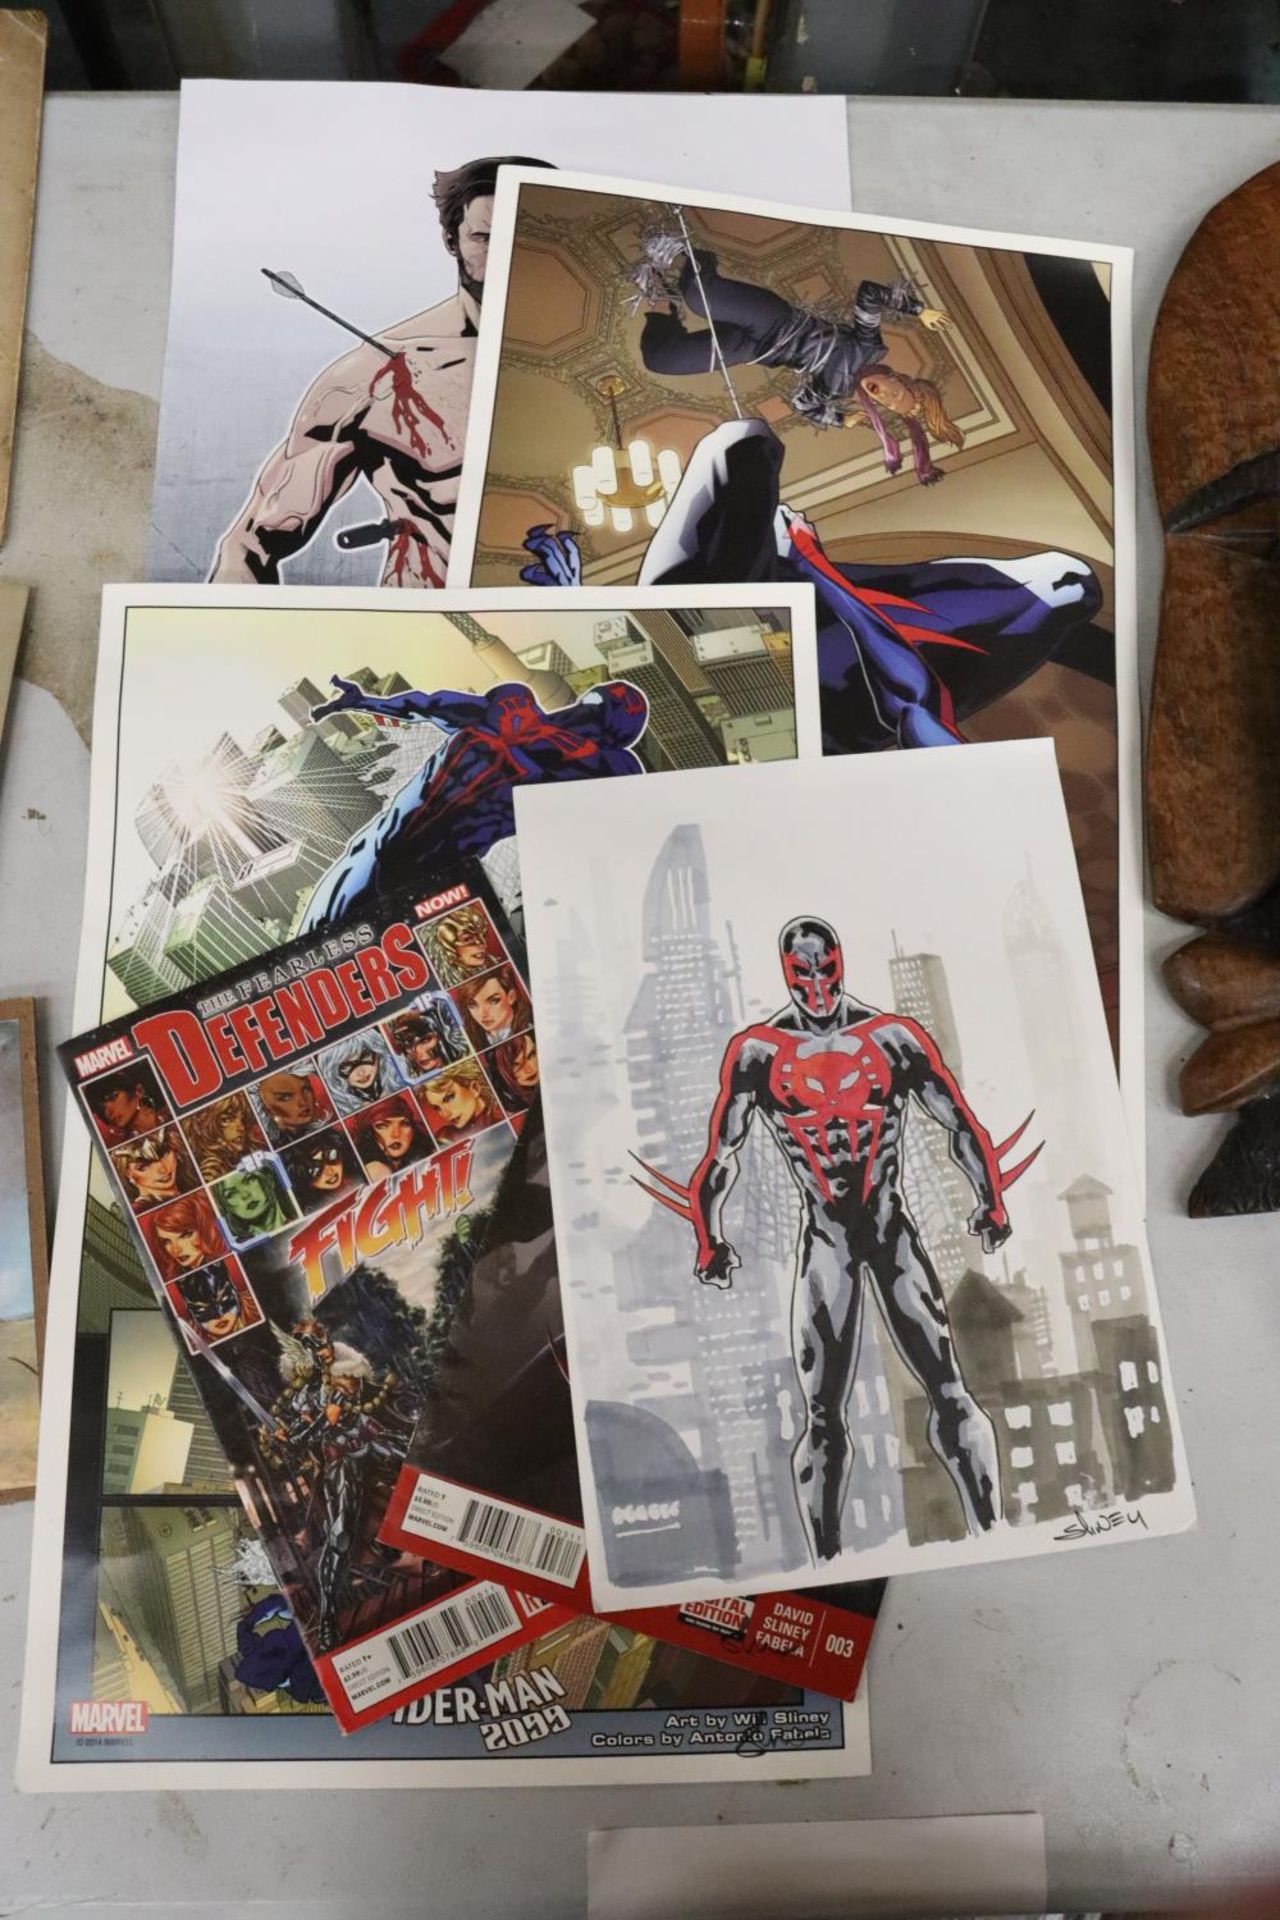 A QUANTITY OF SUPERHERO RELATED POSTERS, MAGAZINES PLUS A MIXED MEDIA PICTURE OF SPIDERMAN WITH